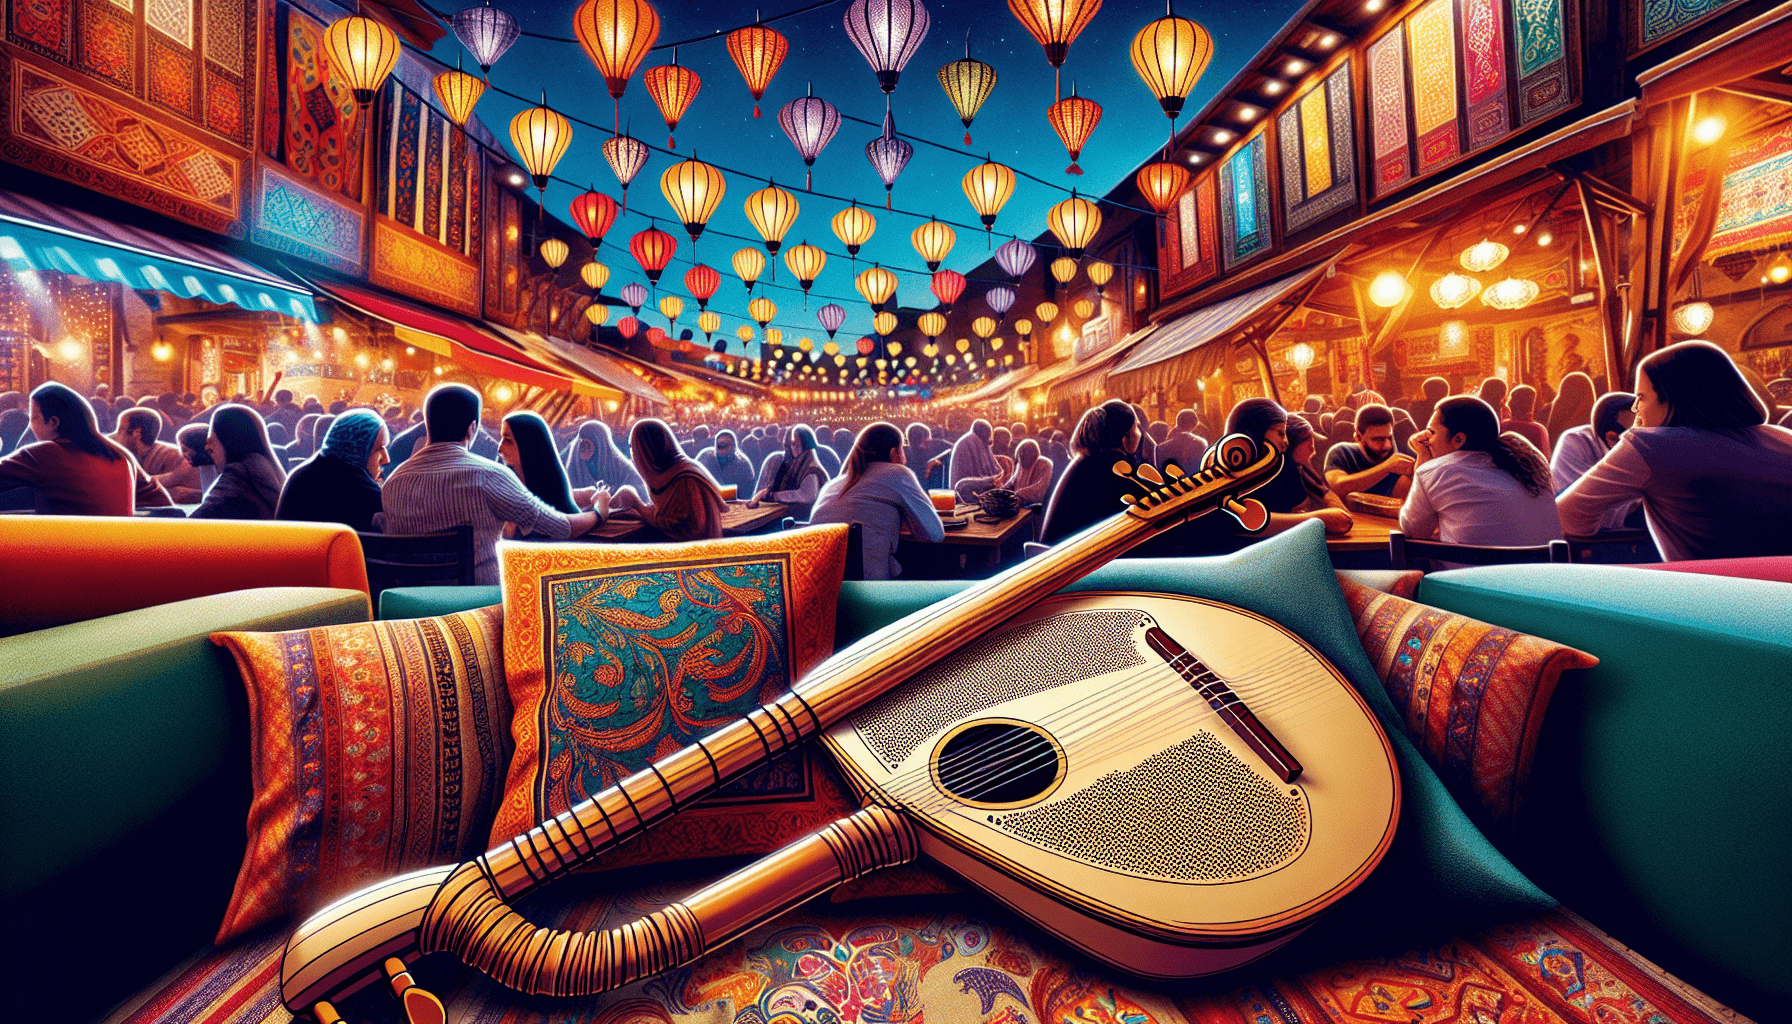 A vibrant marketplace scene at night, featuring colorful hanging lanterns and a crowded seating area. In the foreground, a traditional Turkish stringed musical instrument rests on patterned cushions.